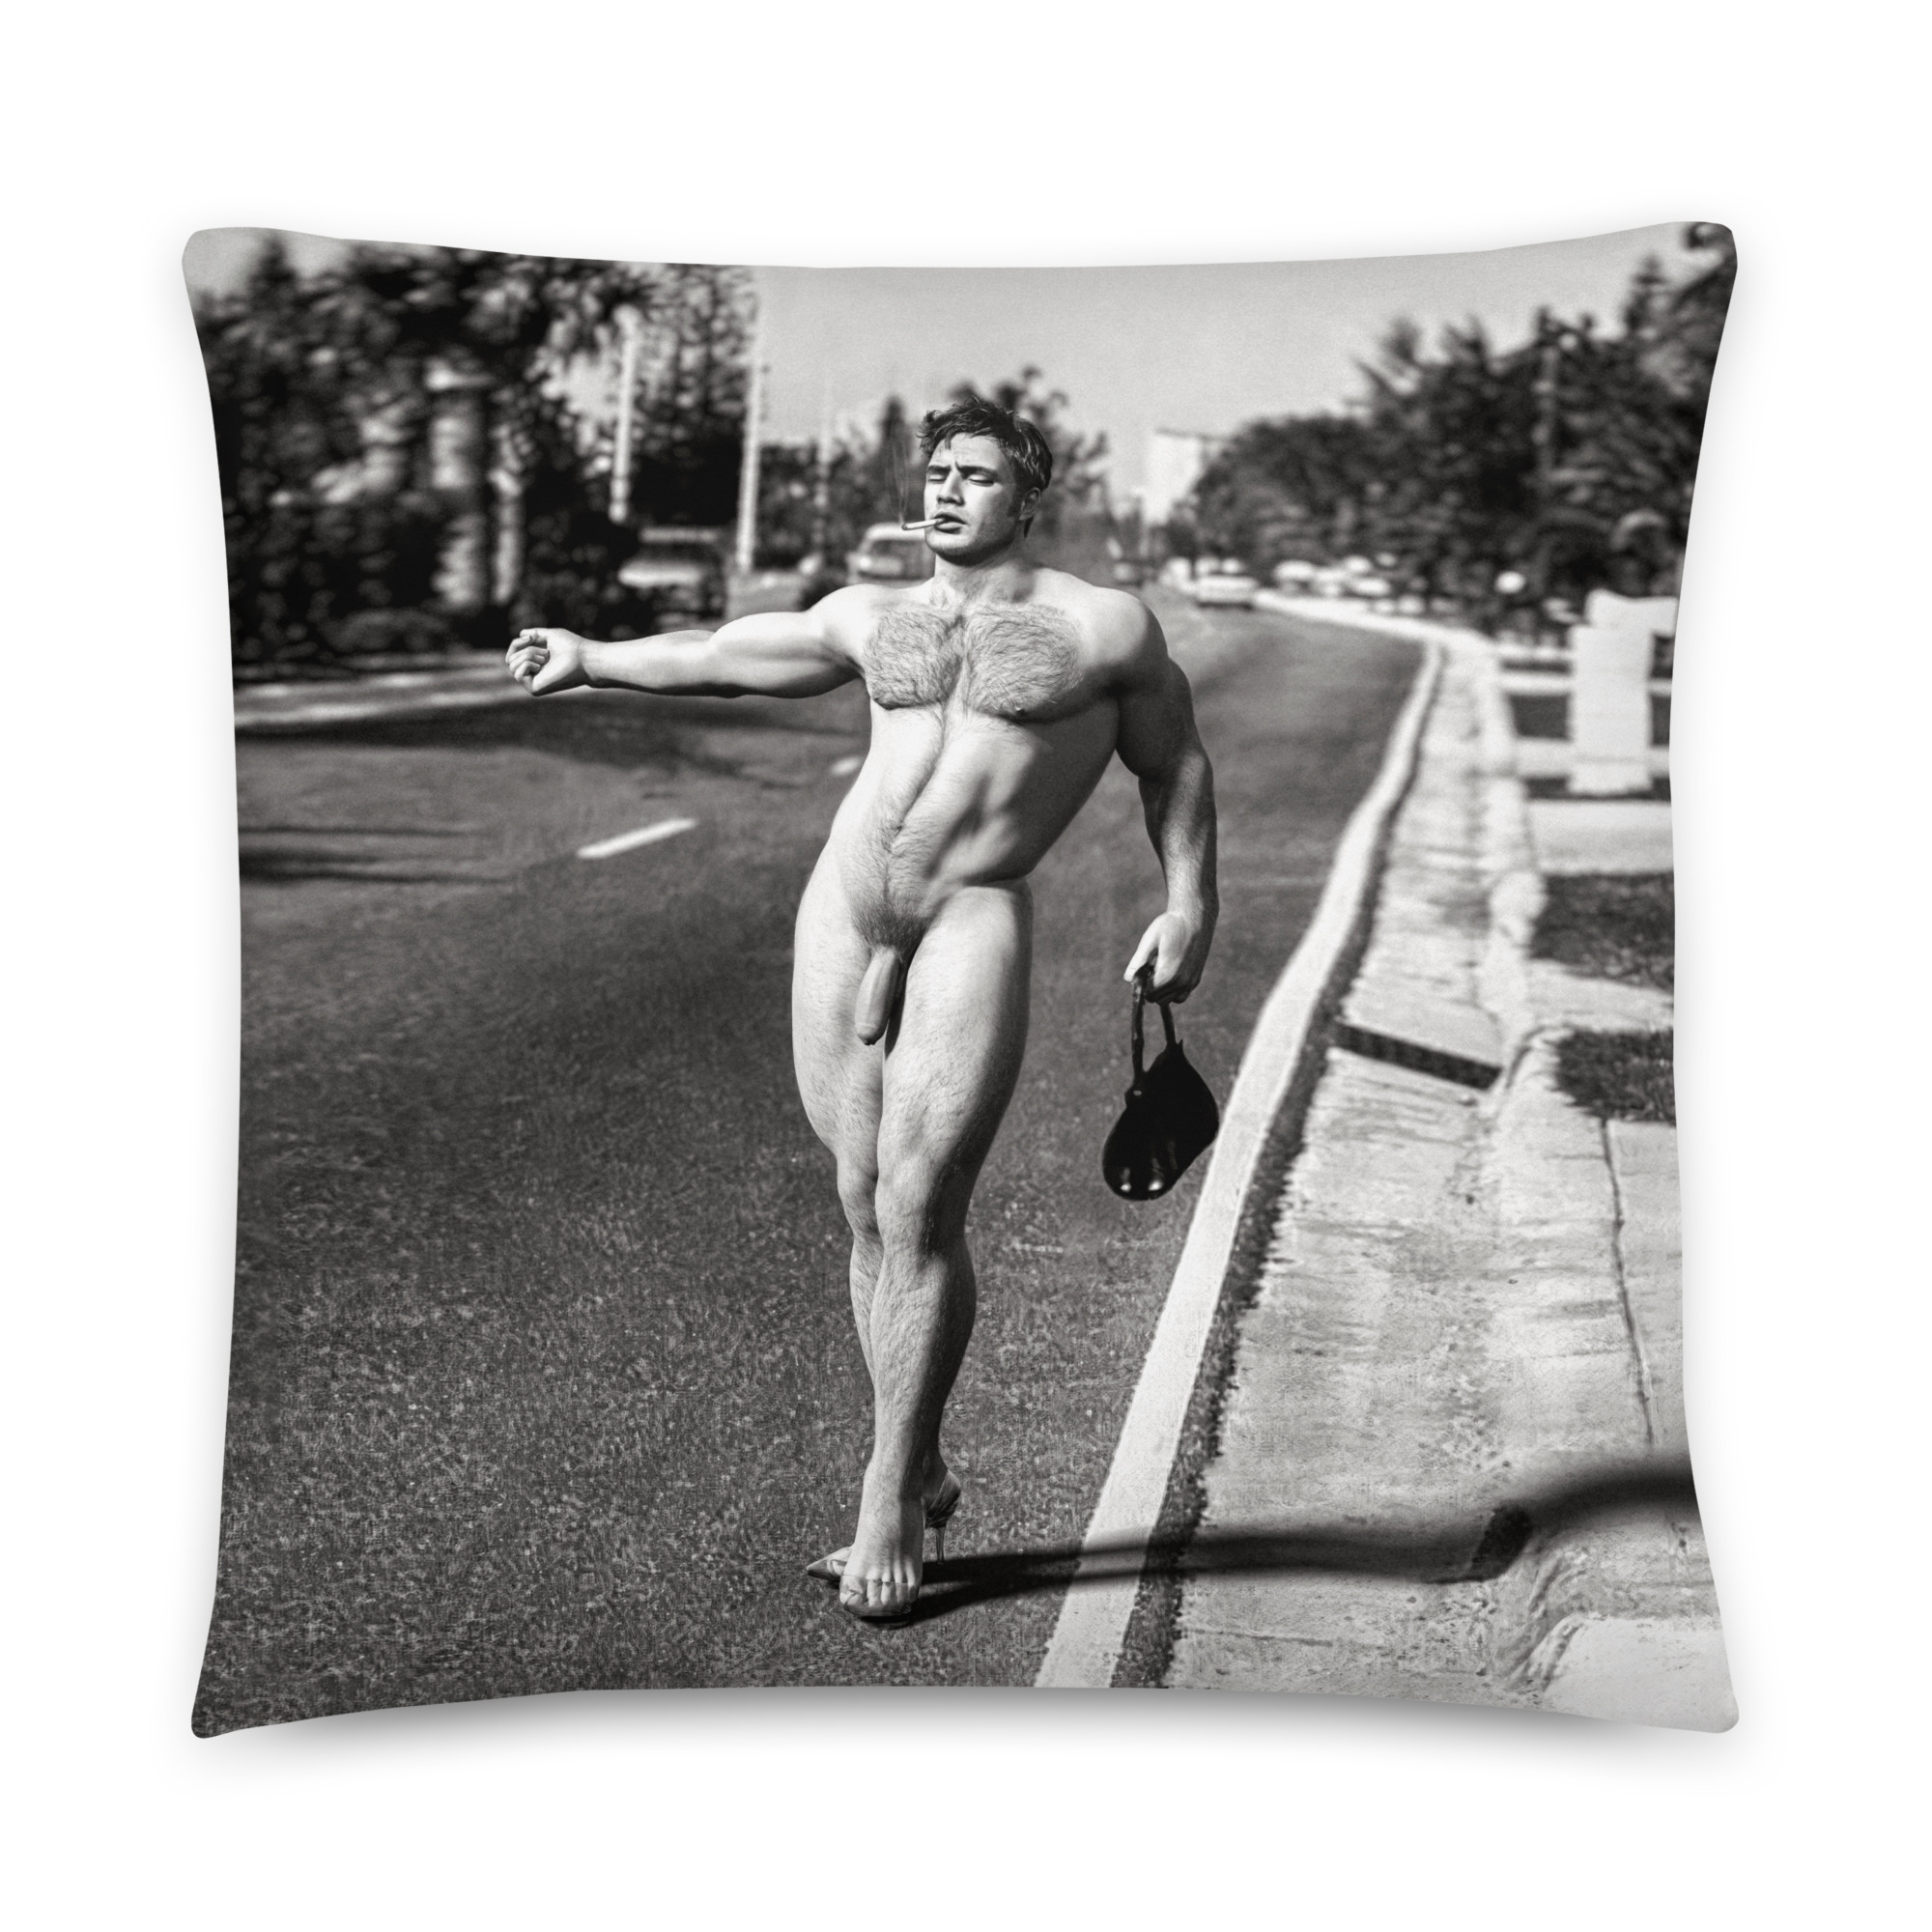 Featured image for “Express Yourself - Basic Pillow”